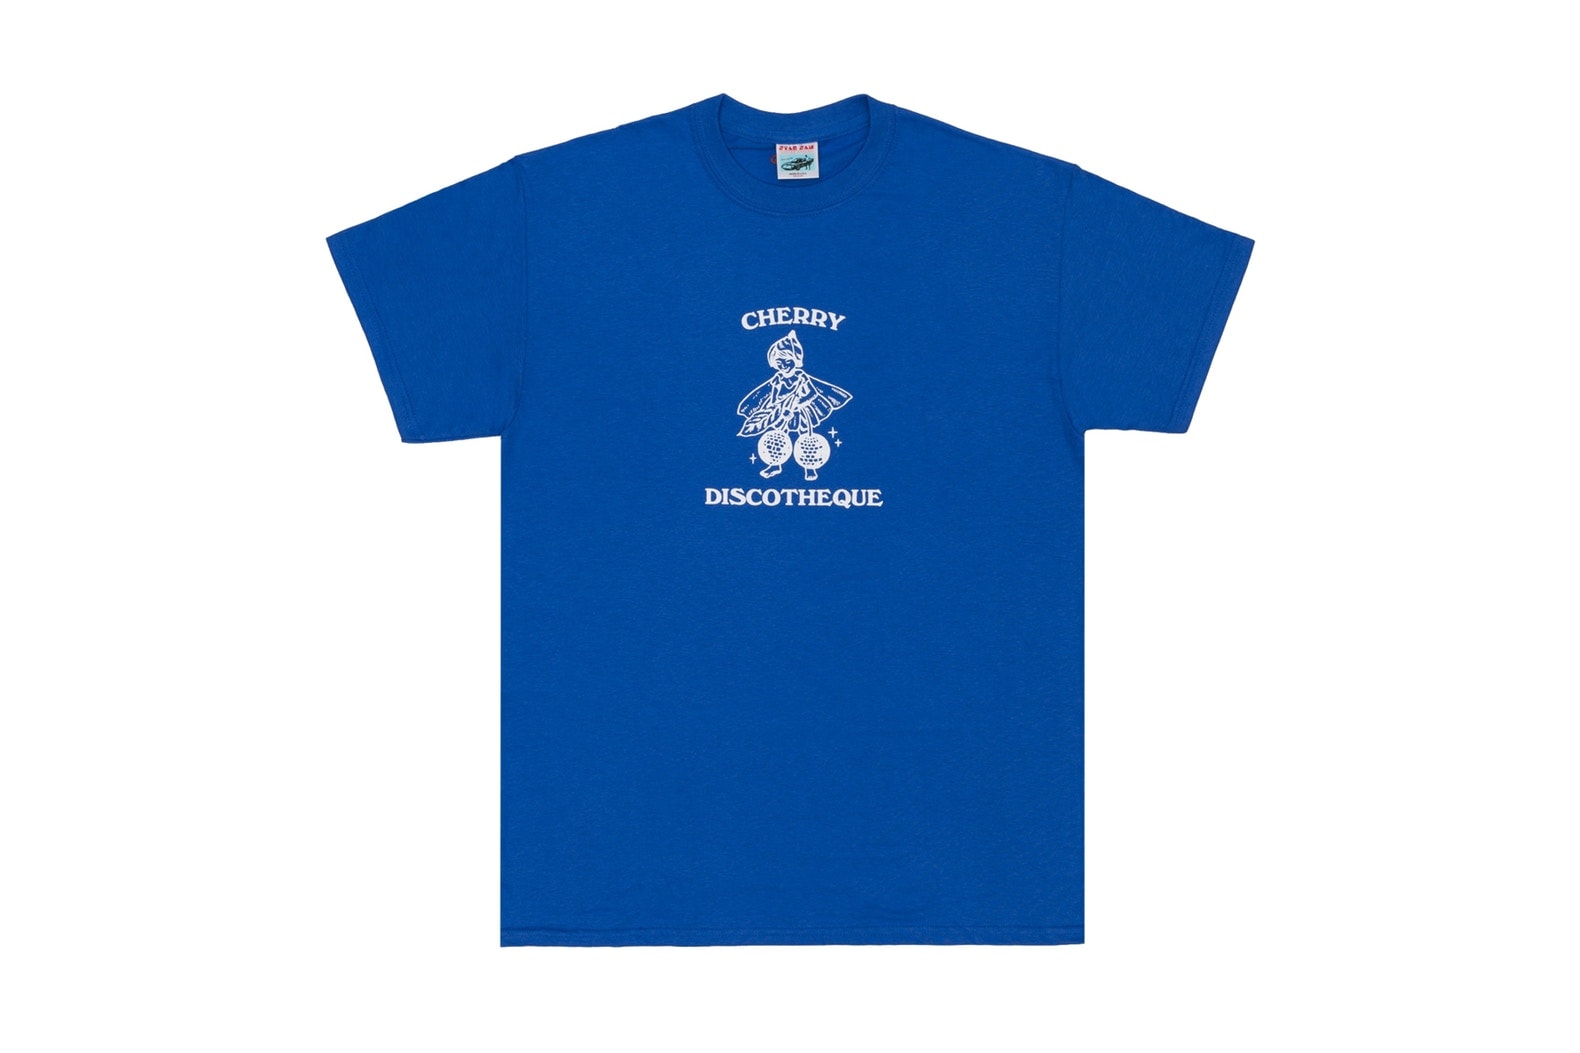 Cherry Discotheque Dover Street Market T-shirt collection